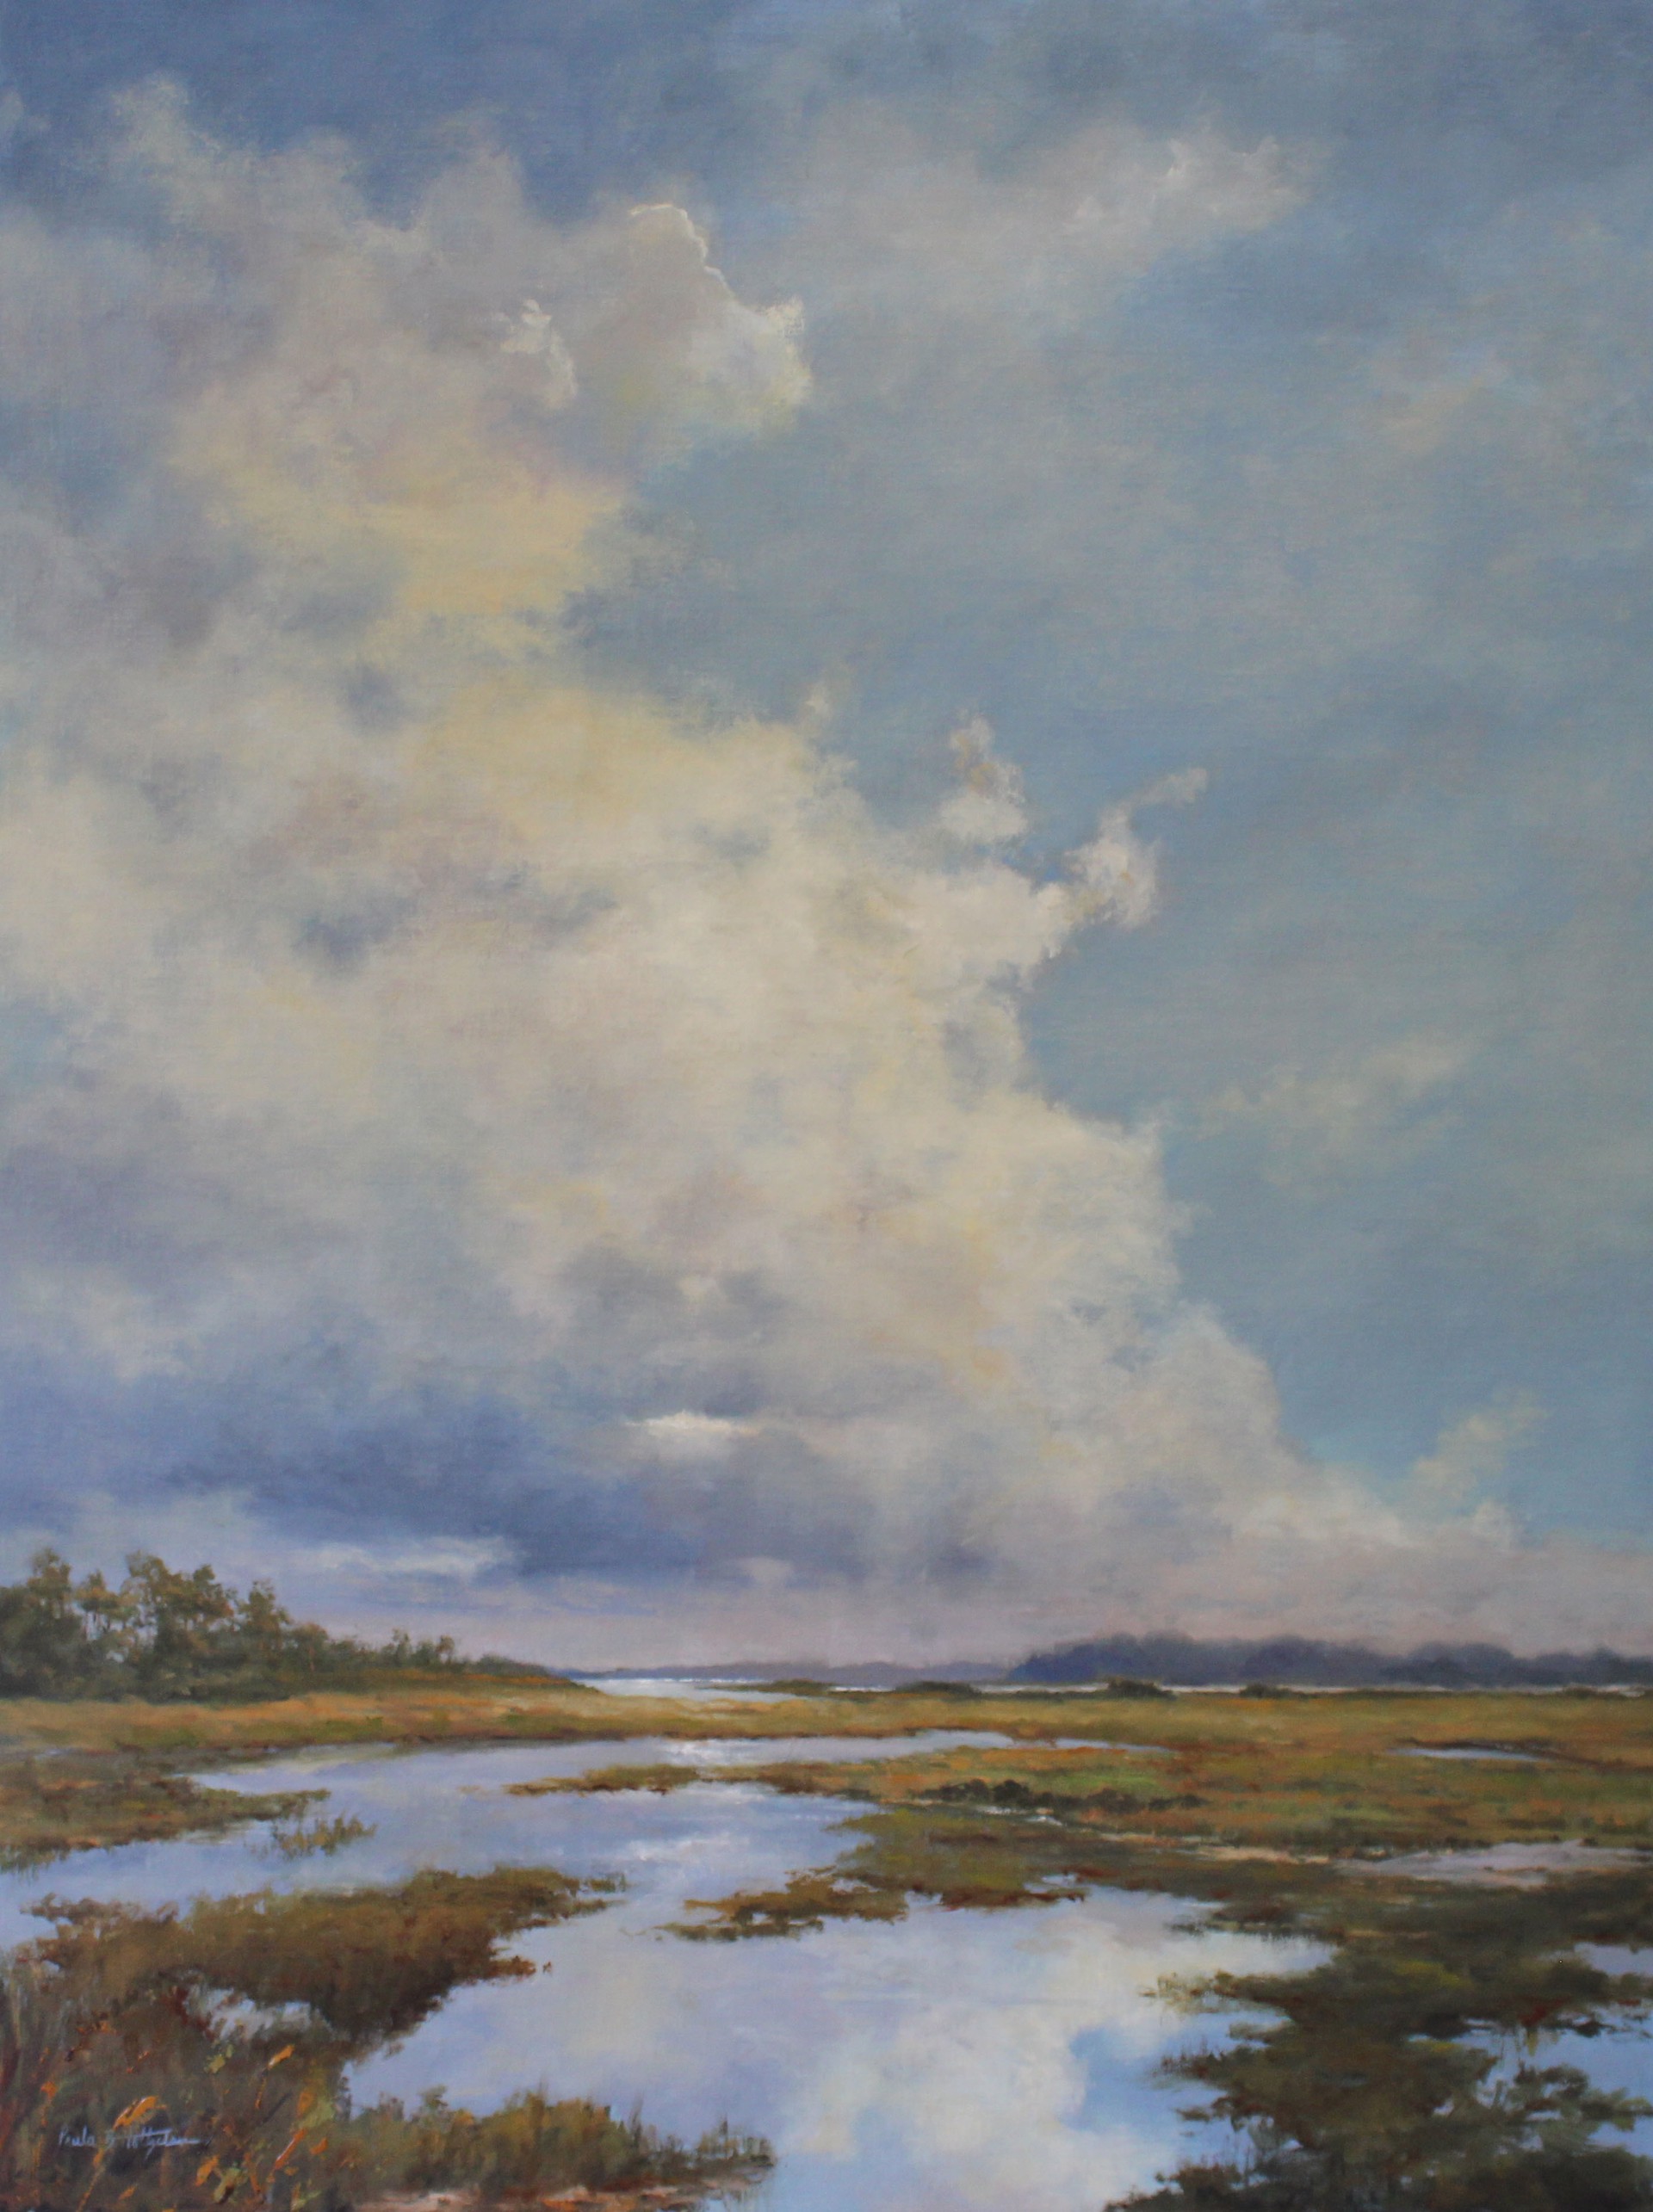 Rising Clouds by Paula Holtzclaw, opa